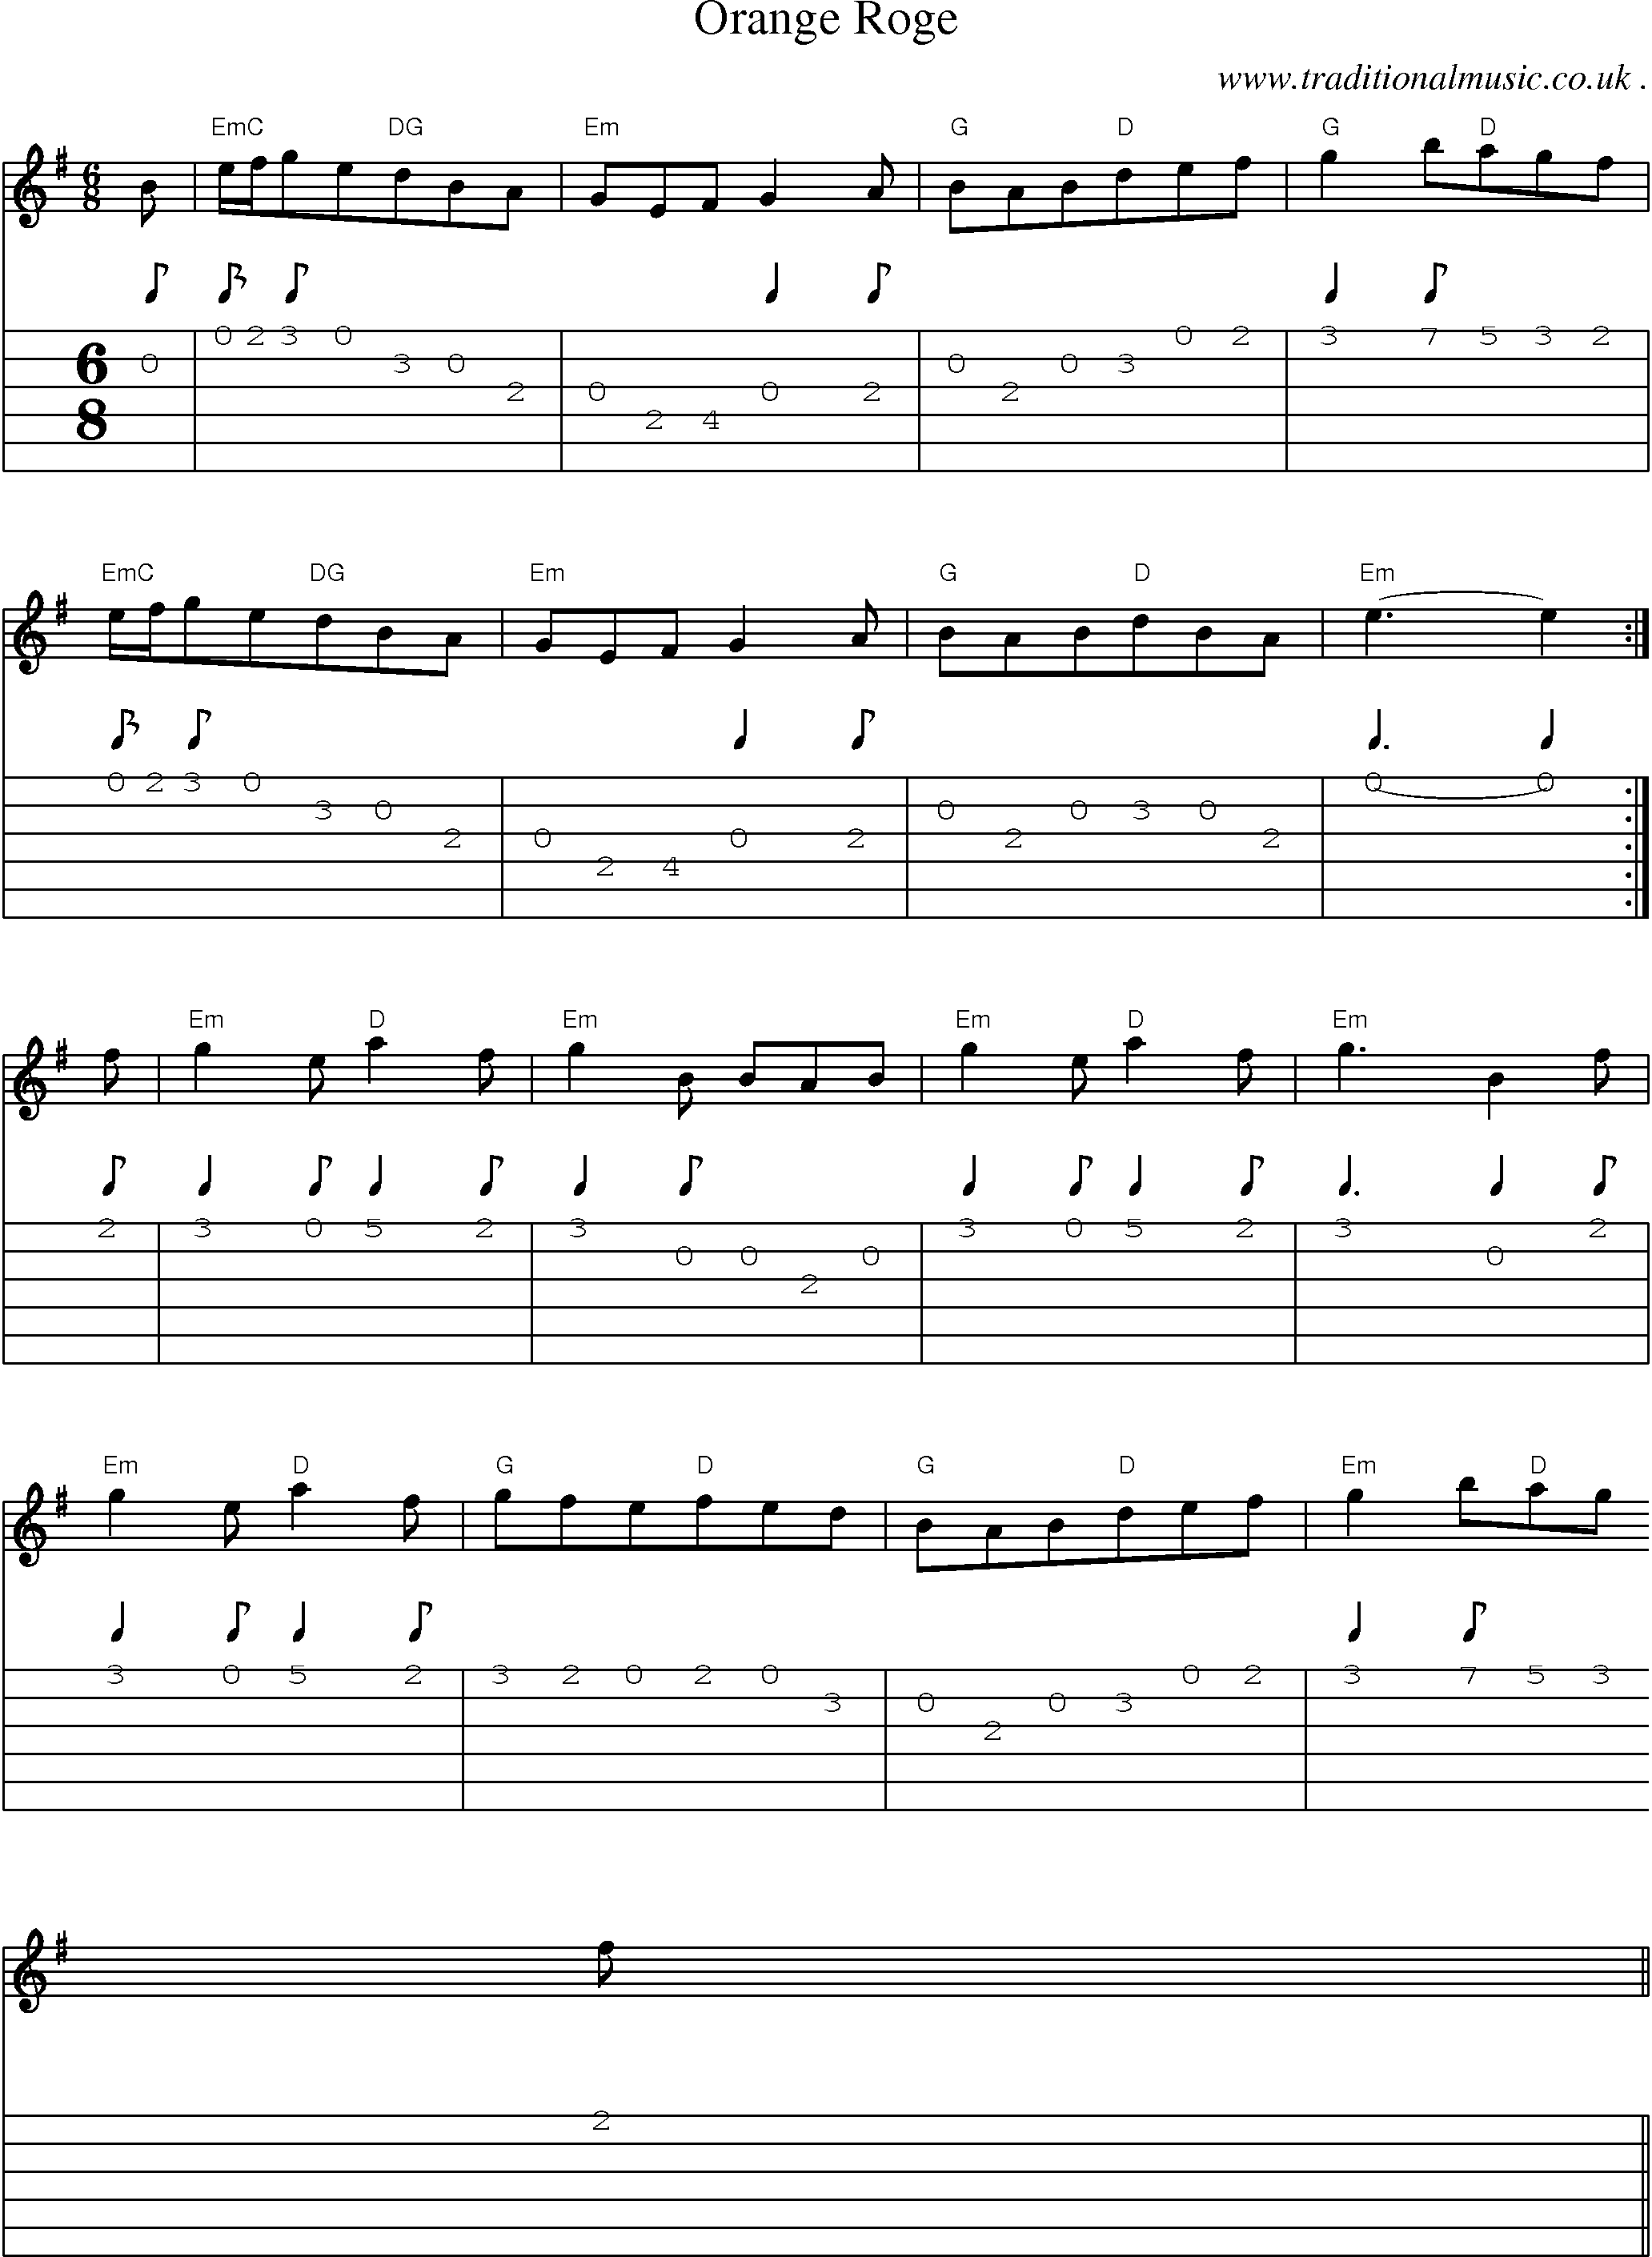 Sheet-Music and Guitar Tabs for Orange Roge